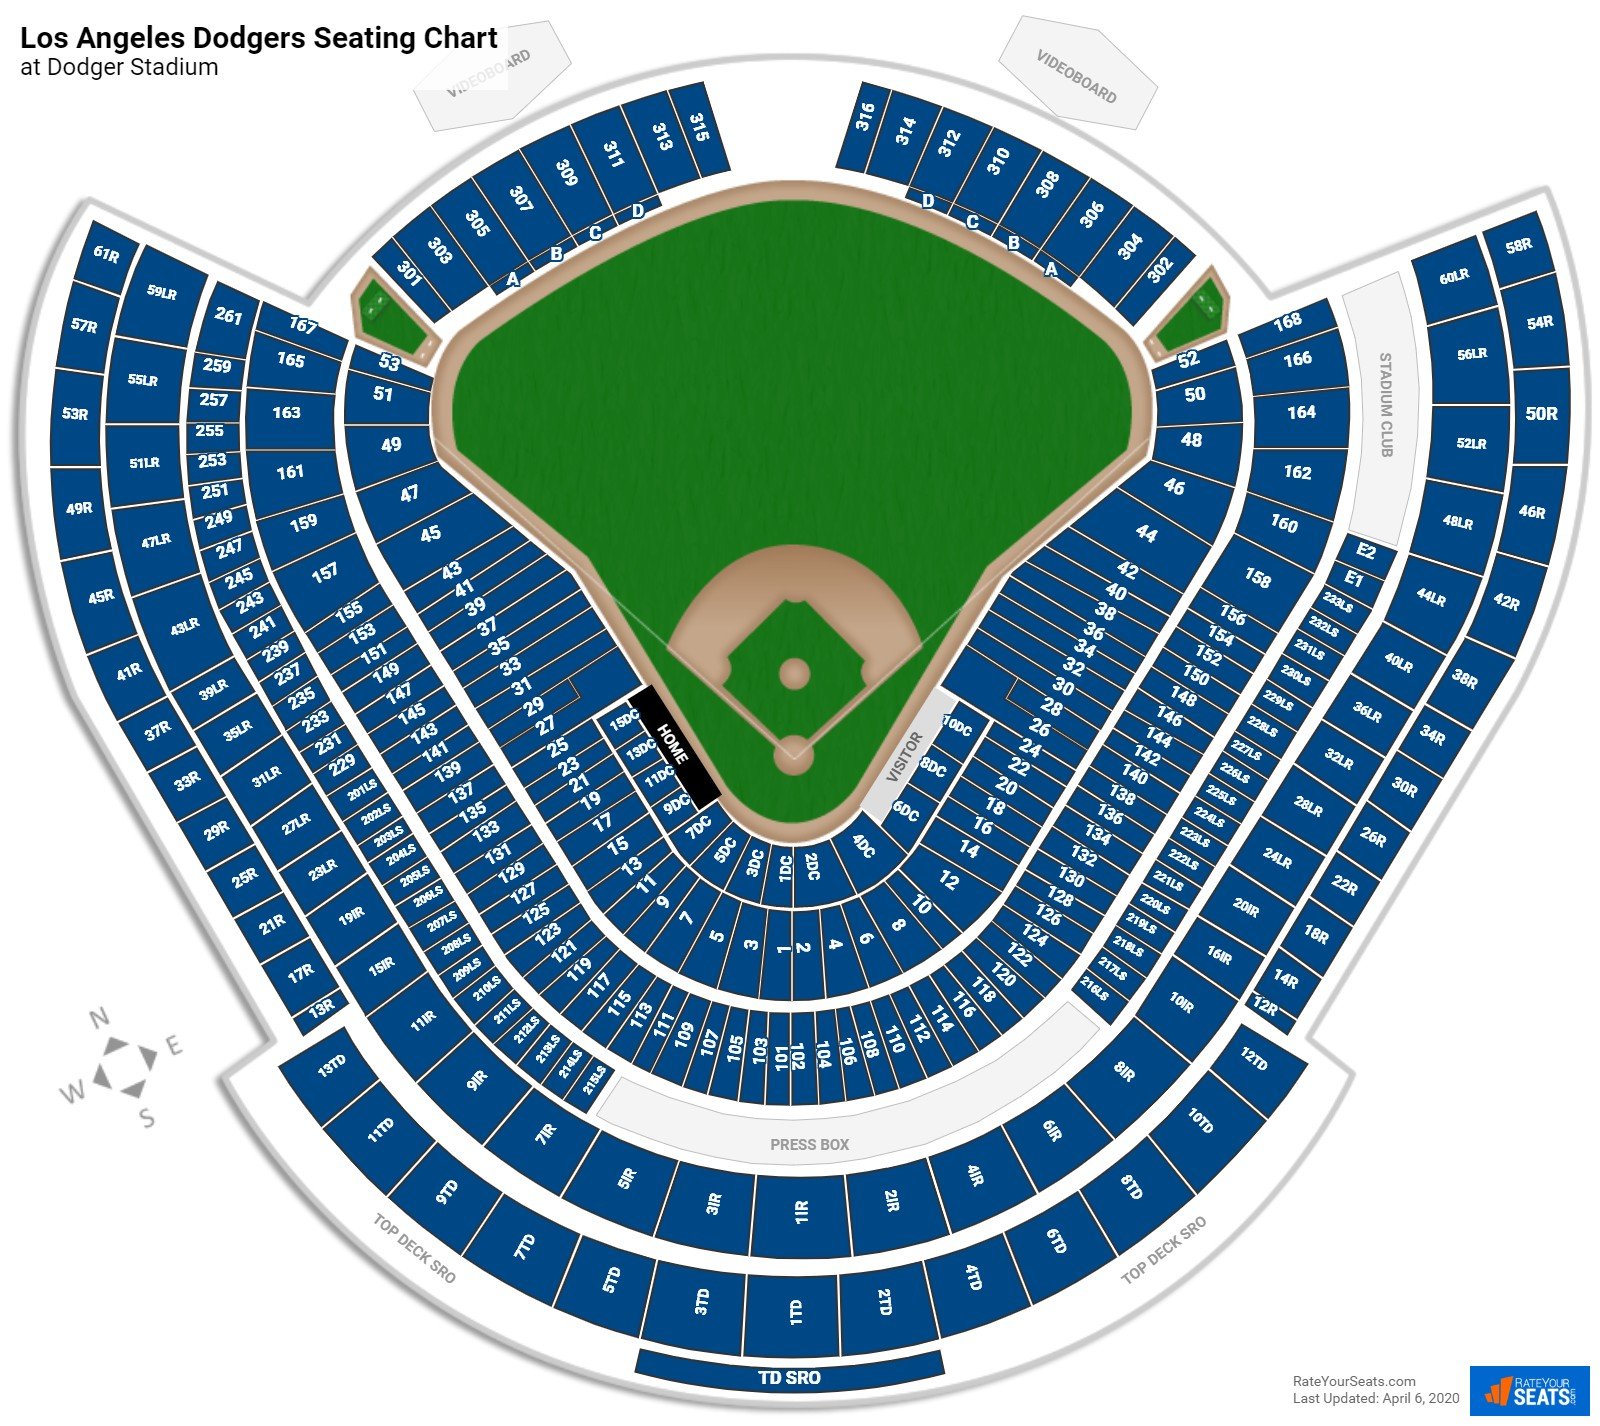 Los Angeles Dodgers Seating Charts At Dodger Stadium Rateyourseats Com